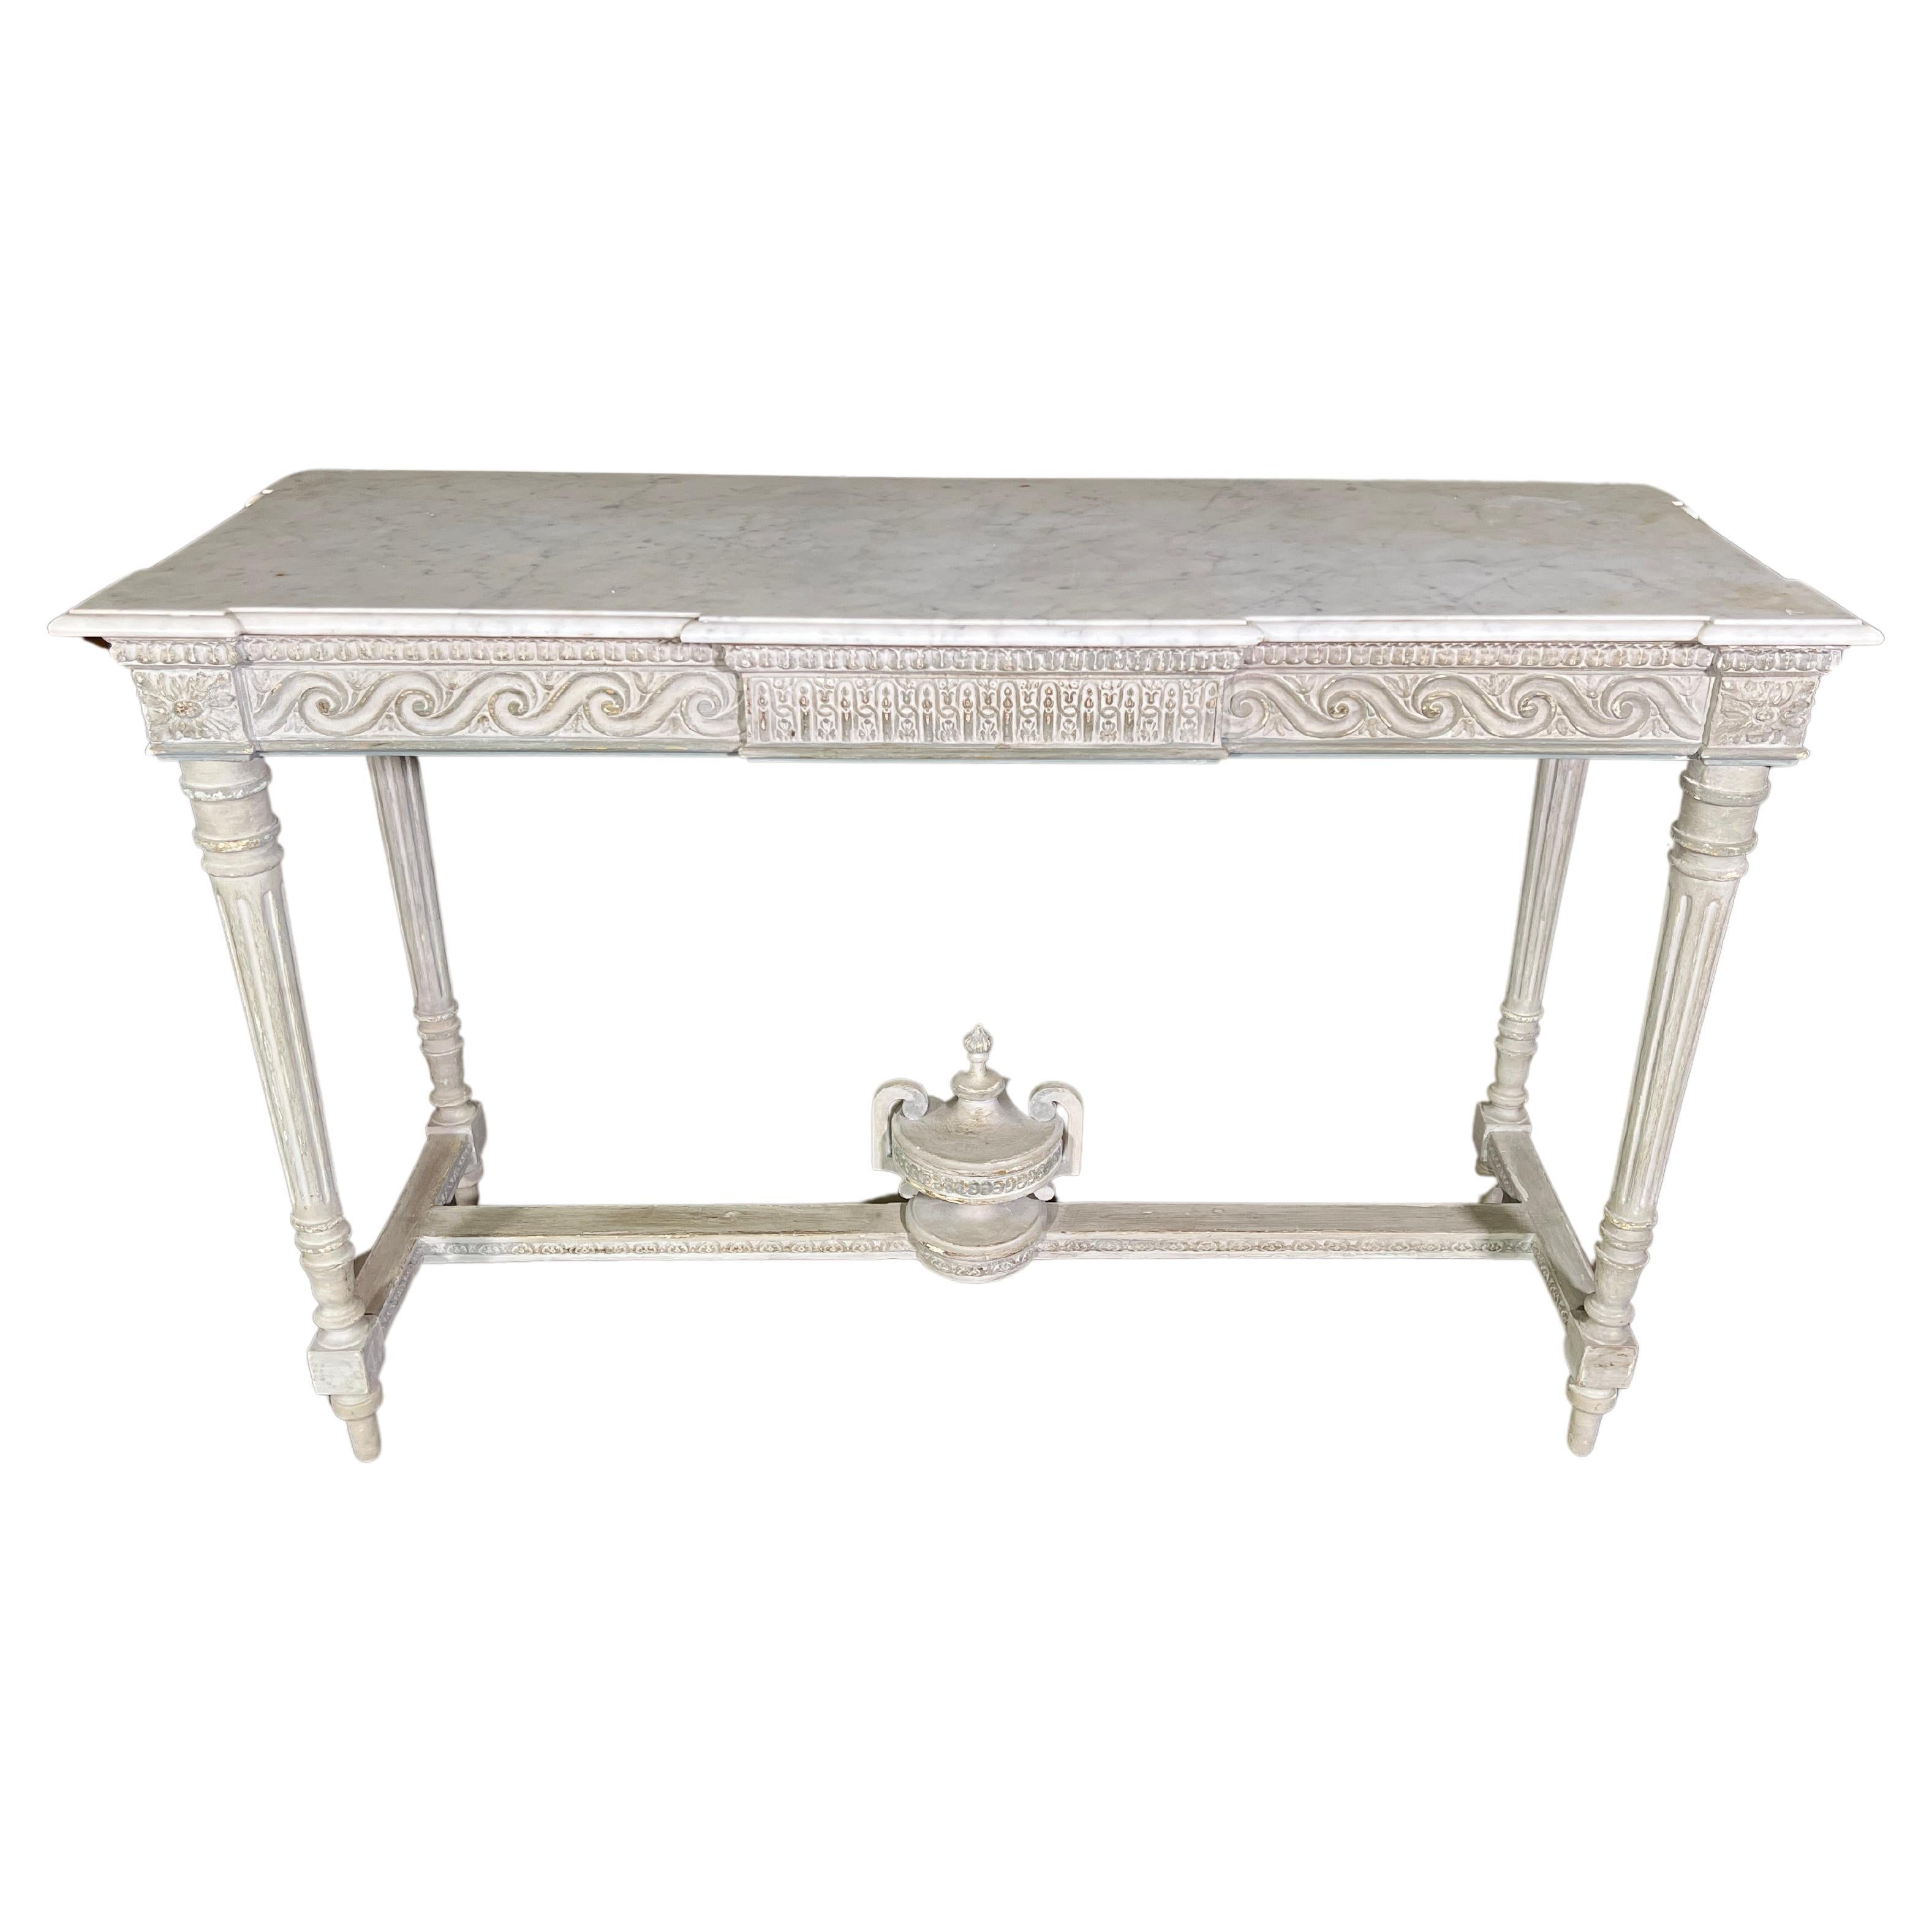 Circa 1830 Louis XVI Style Painted Console